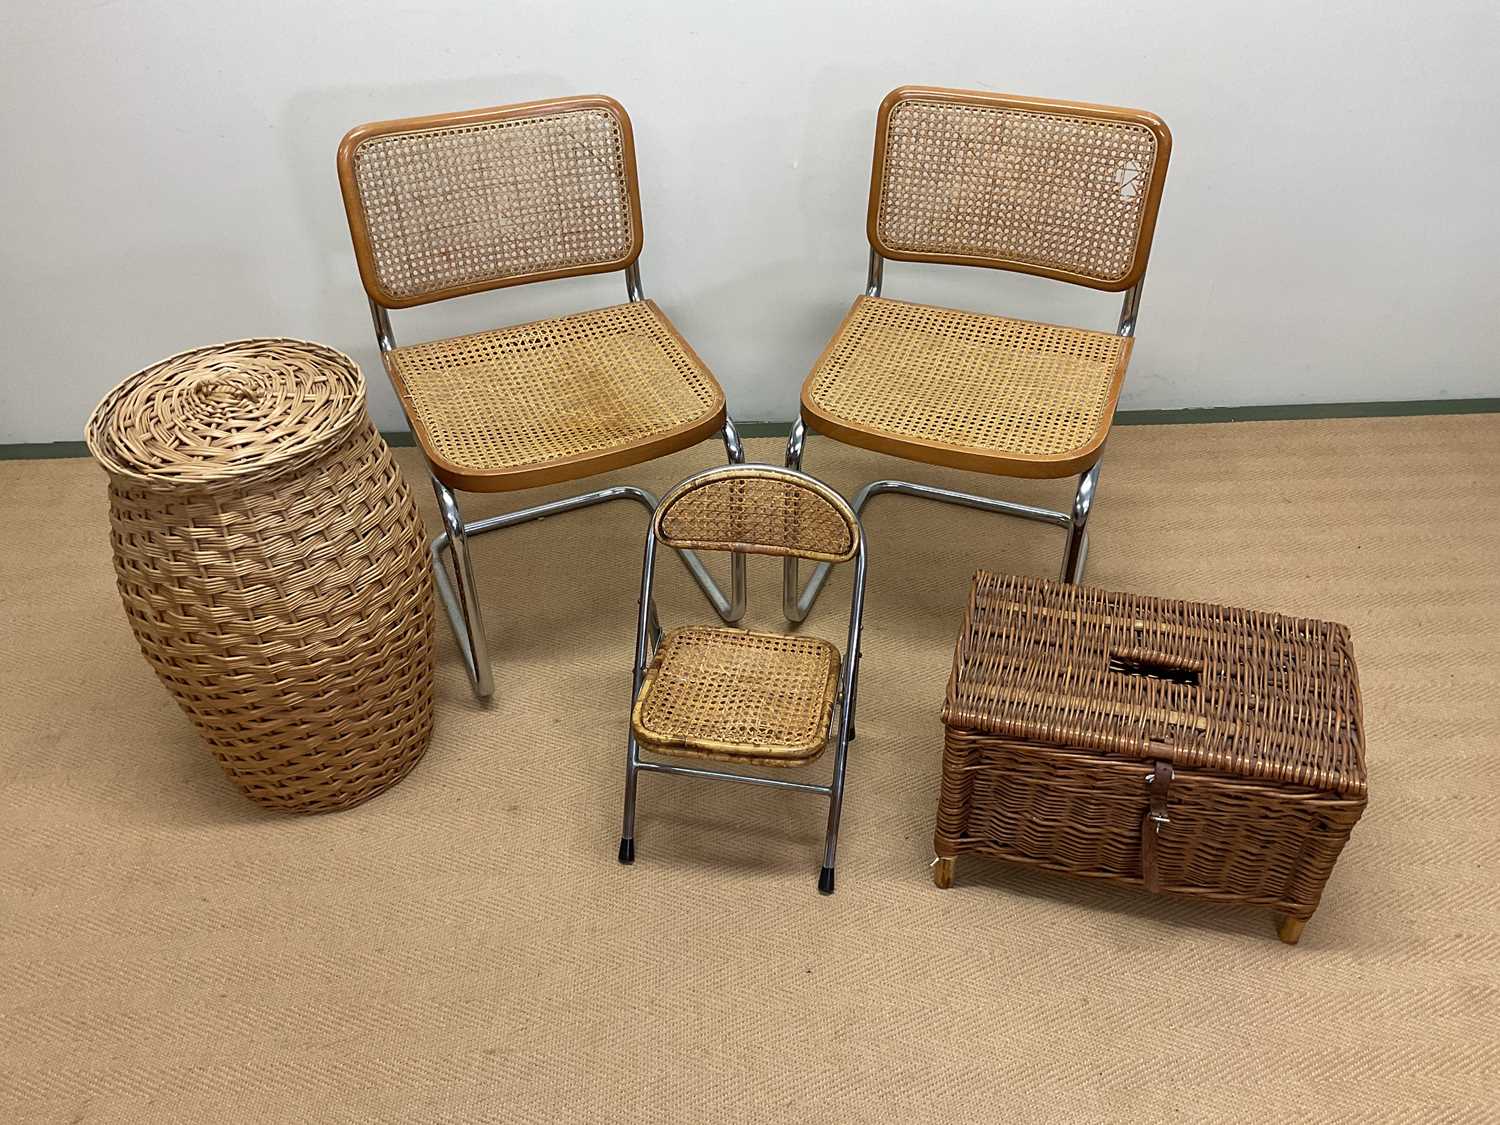 Pair of chrome and rattan chairs, a child's folding rattan chair and various wicker items.